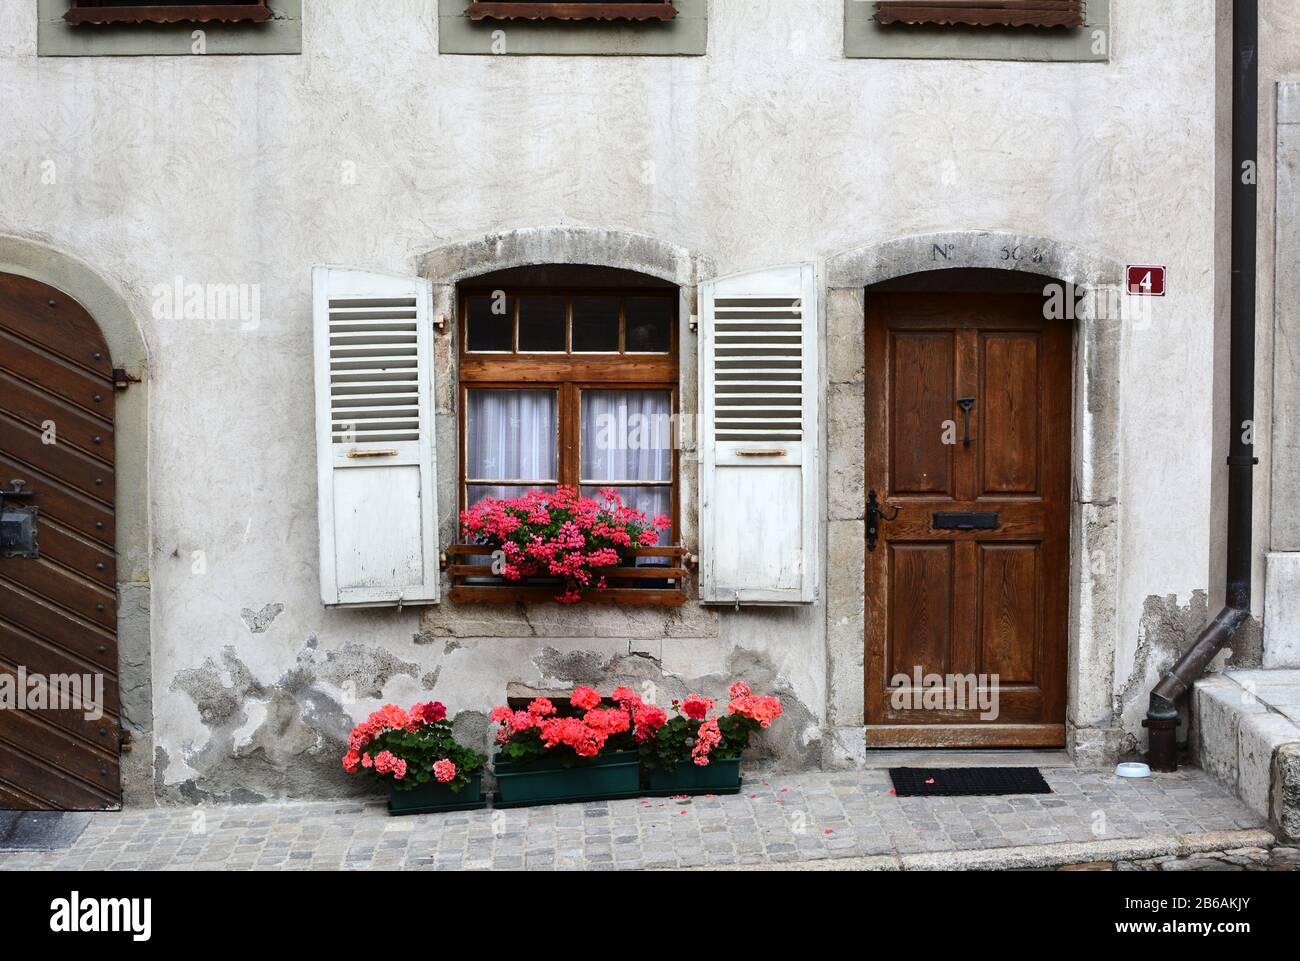 GRUYERES, SWITZERLAND - JULY 8, 2014: Front door on traditional Swiss home. The picturesque  home is on the cobblestone main street in old town Gruyer Stock Photo